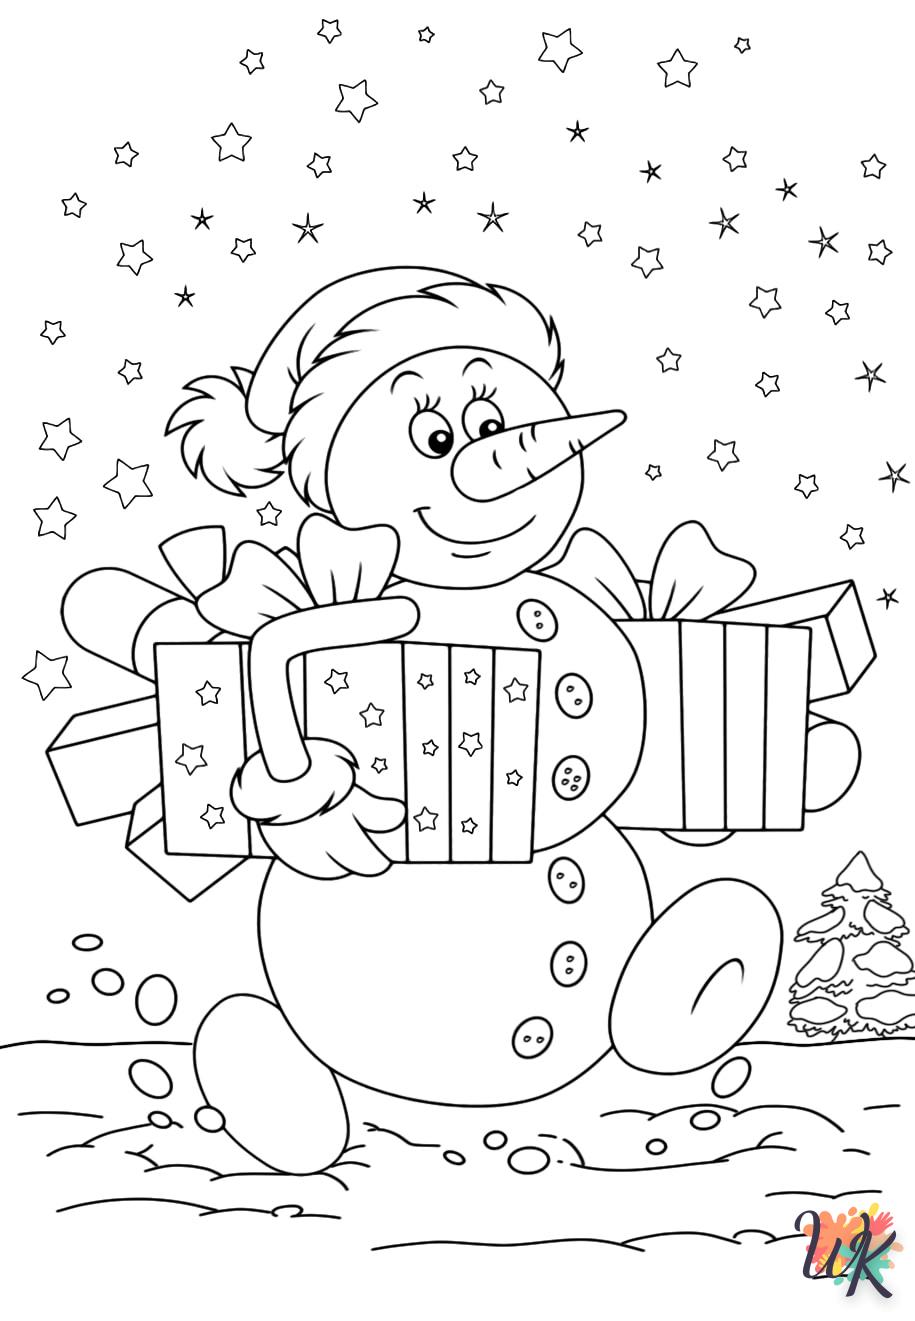 Snowman coloring page to color online for free 1